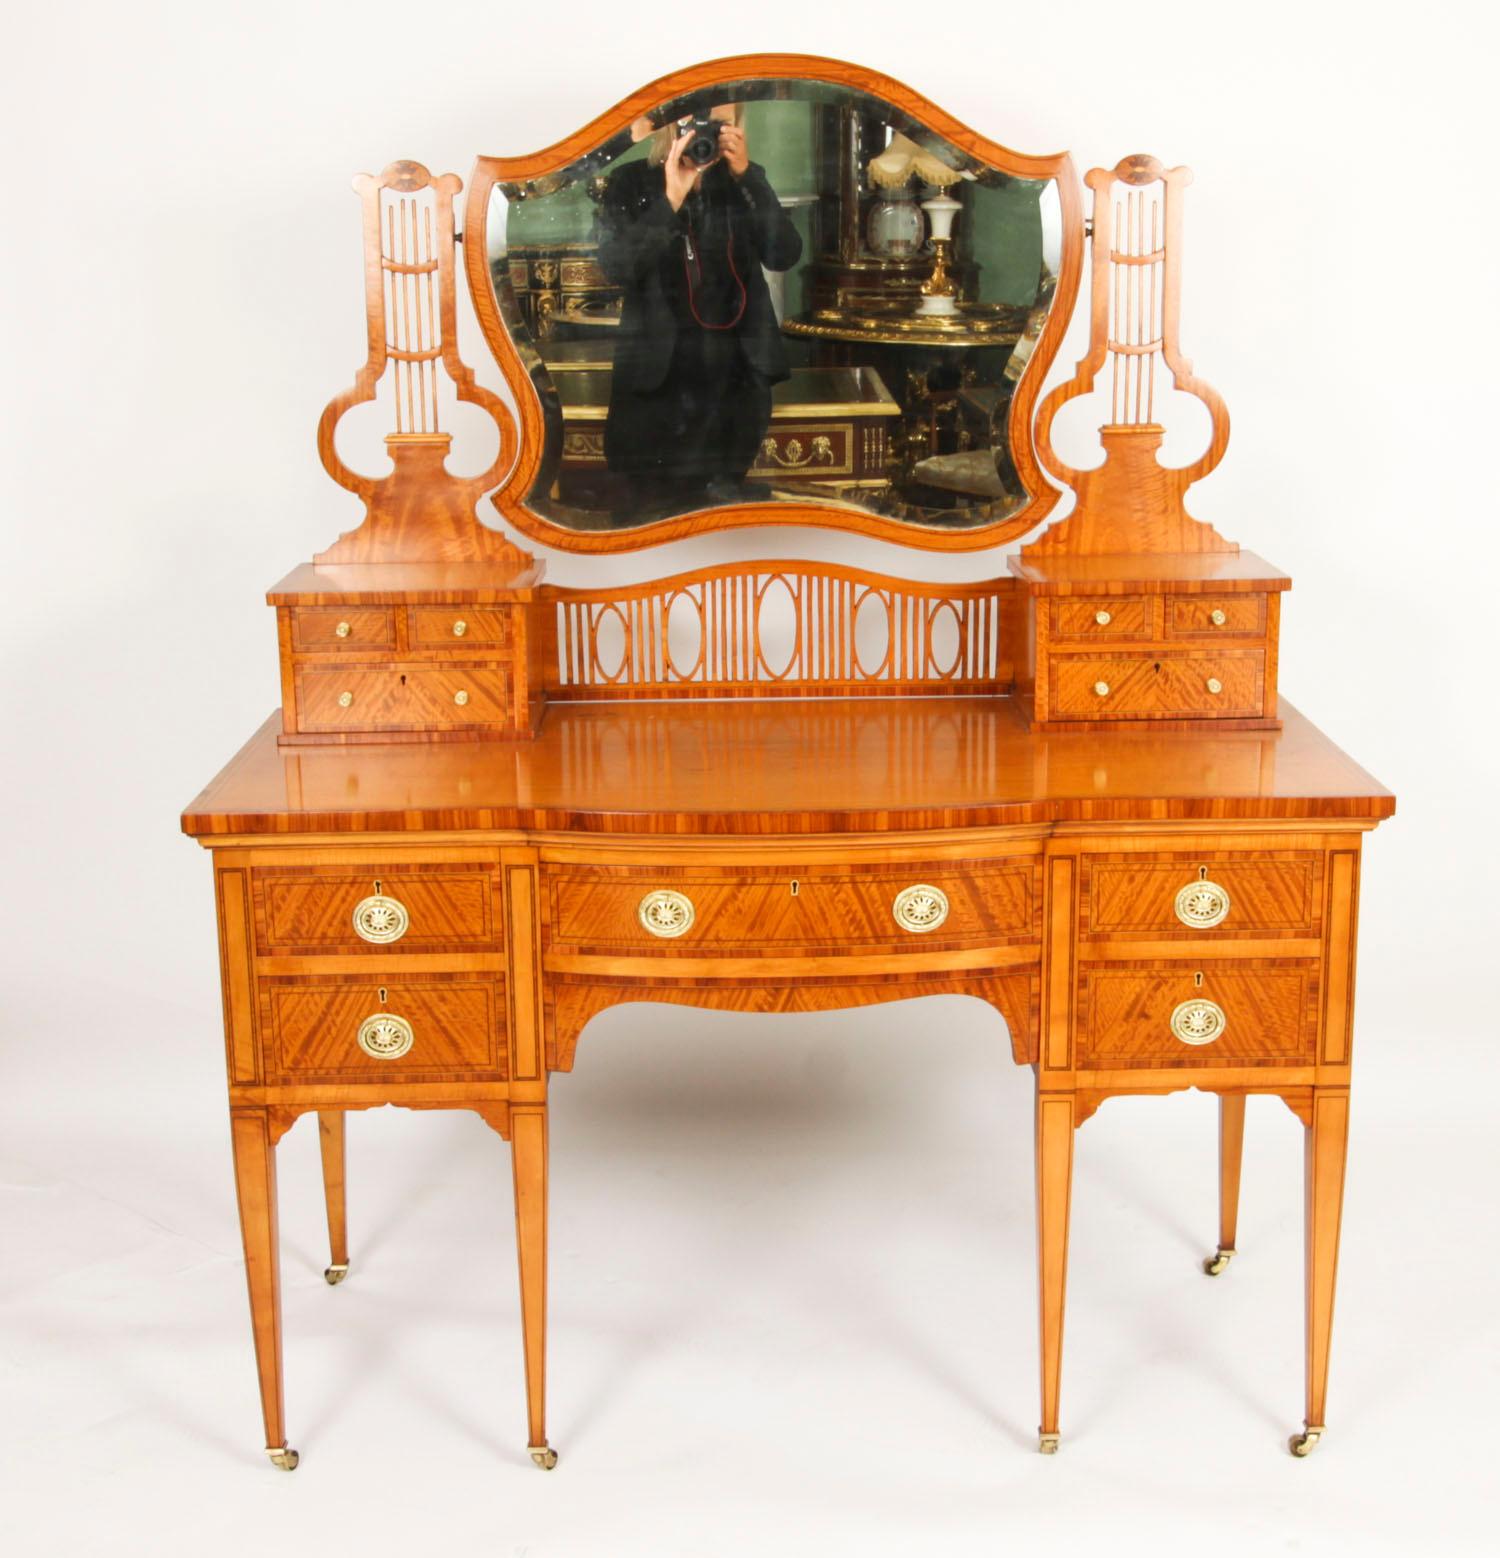 This is a fine antique satinwood serpentine fronted dressing table by the world renowned cabinet maker an retailer Maple & Co, Circa 1880 in date.
 
The stunning satinwood dressing table has boxwood and ebonised stringing inlay and crossbanding